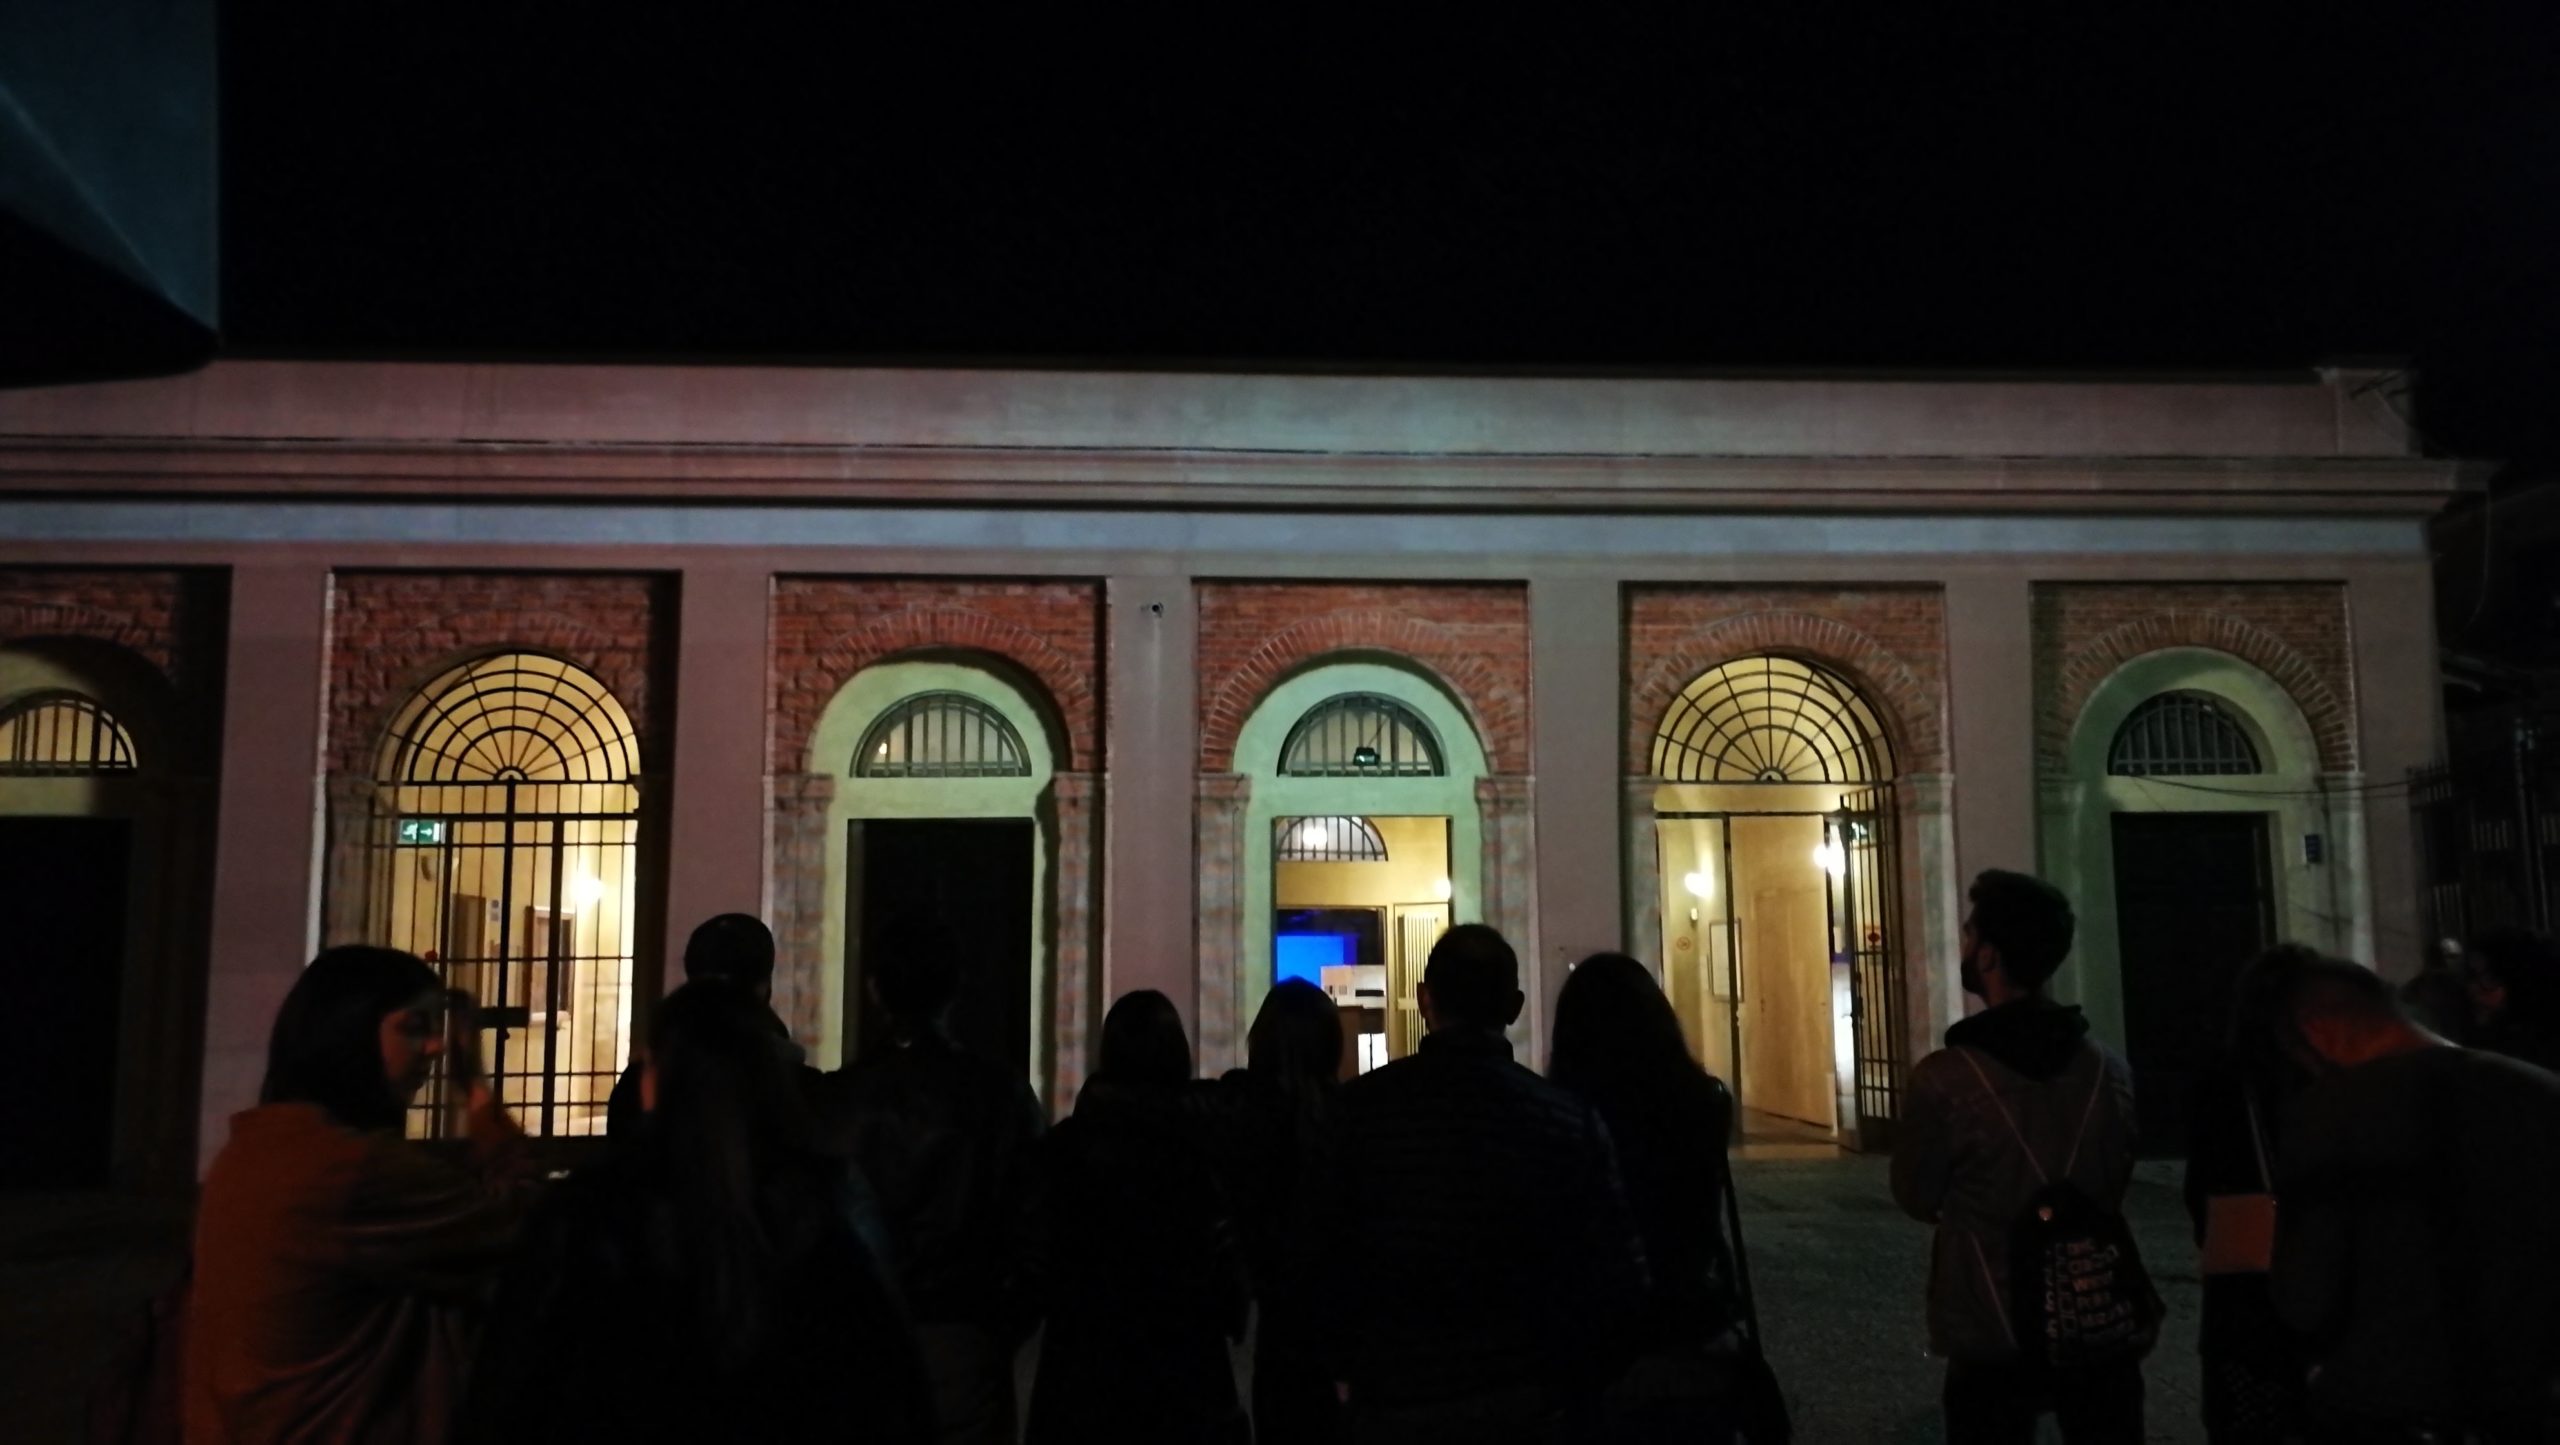 projection mapping in Pisa by Sinapsi videomapping lab